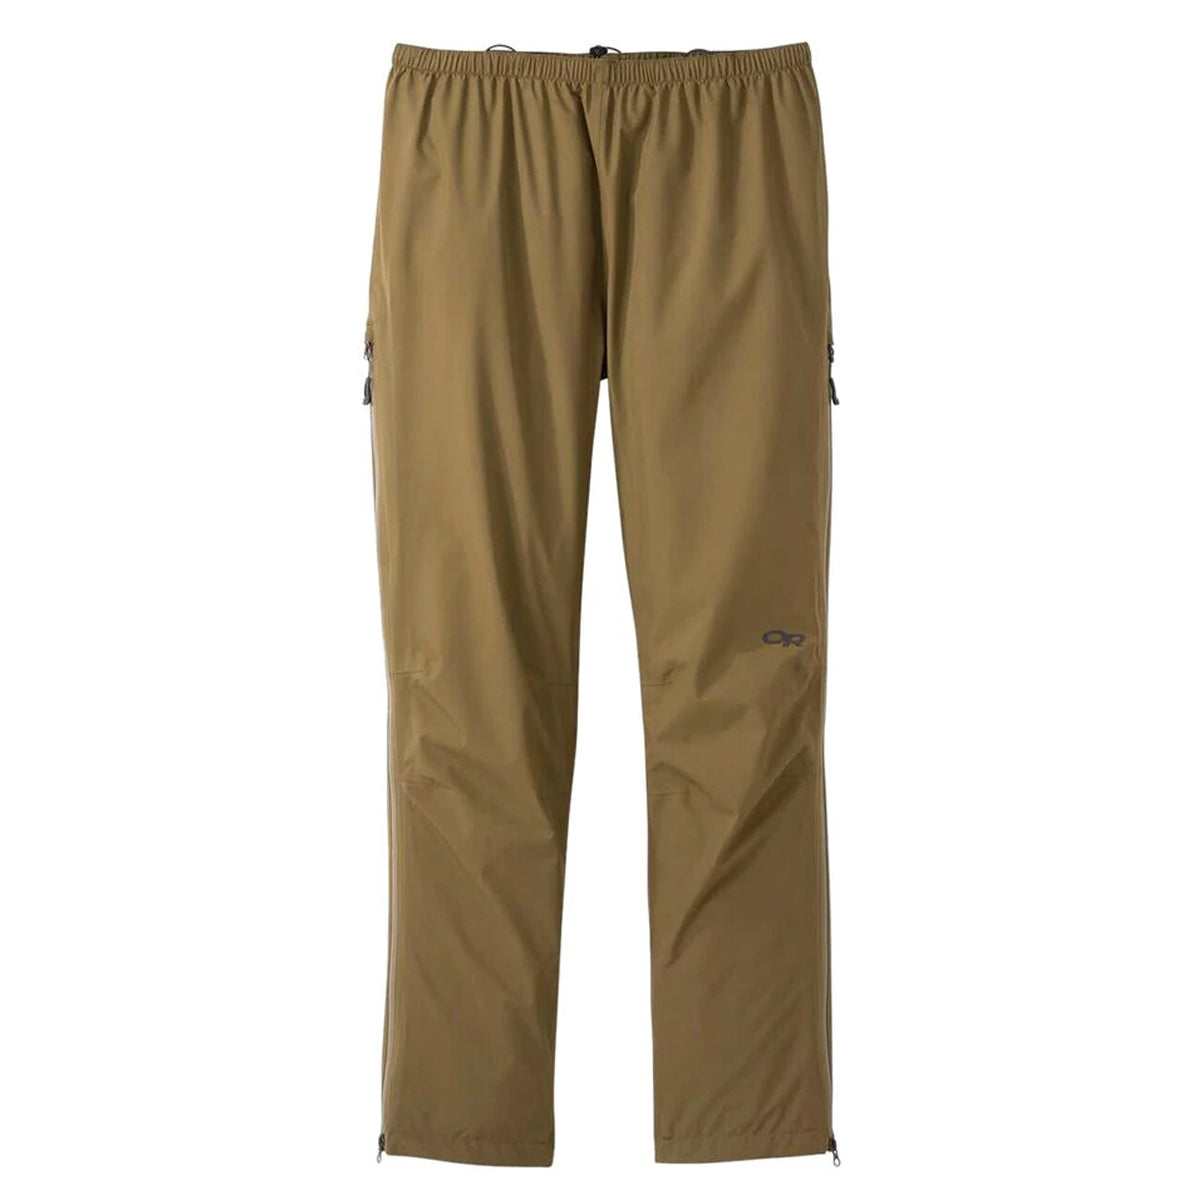 Outdoor Research Men's Foray Pants in  by GOHUNT | Outdoor Research - GOHUNT Shop